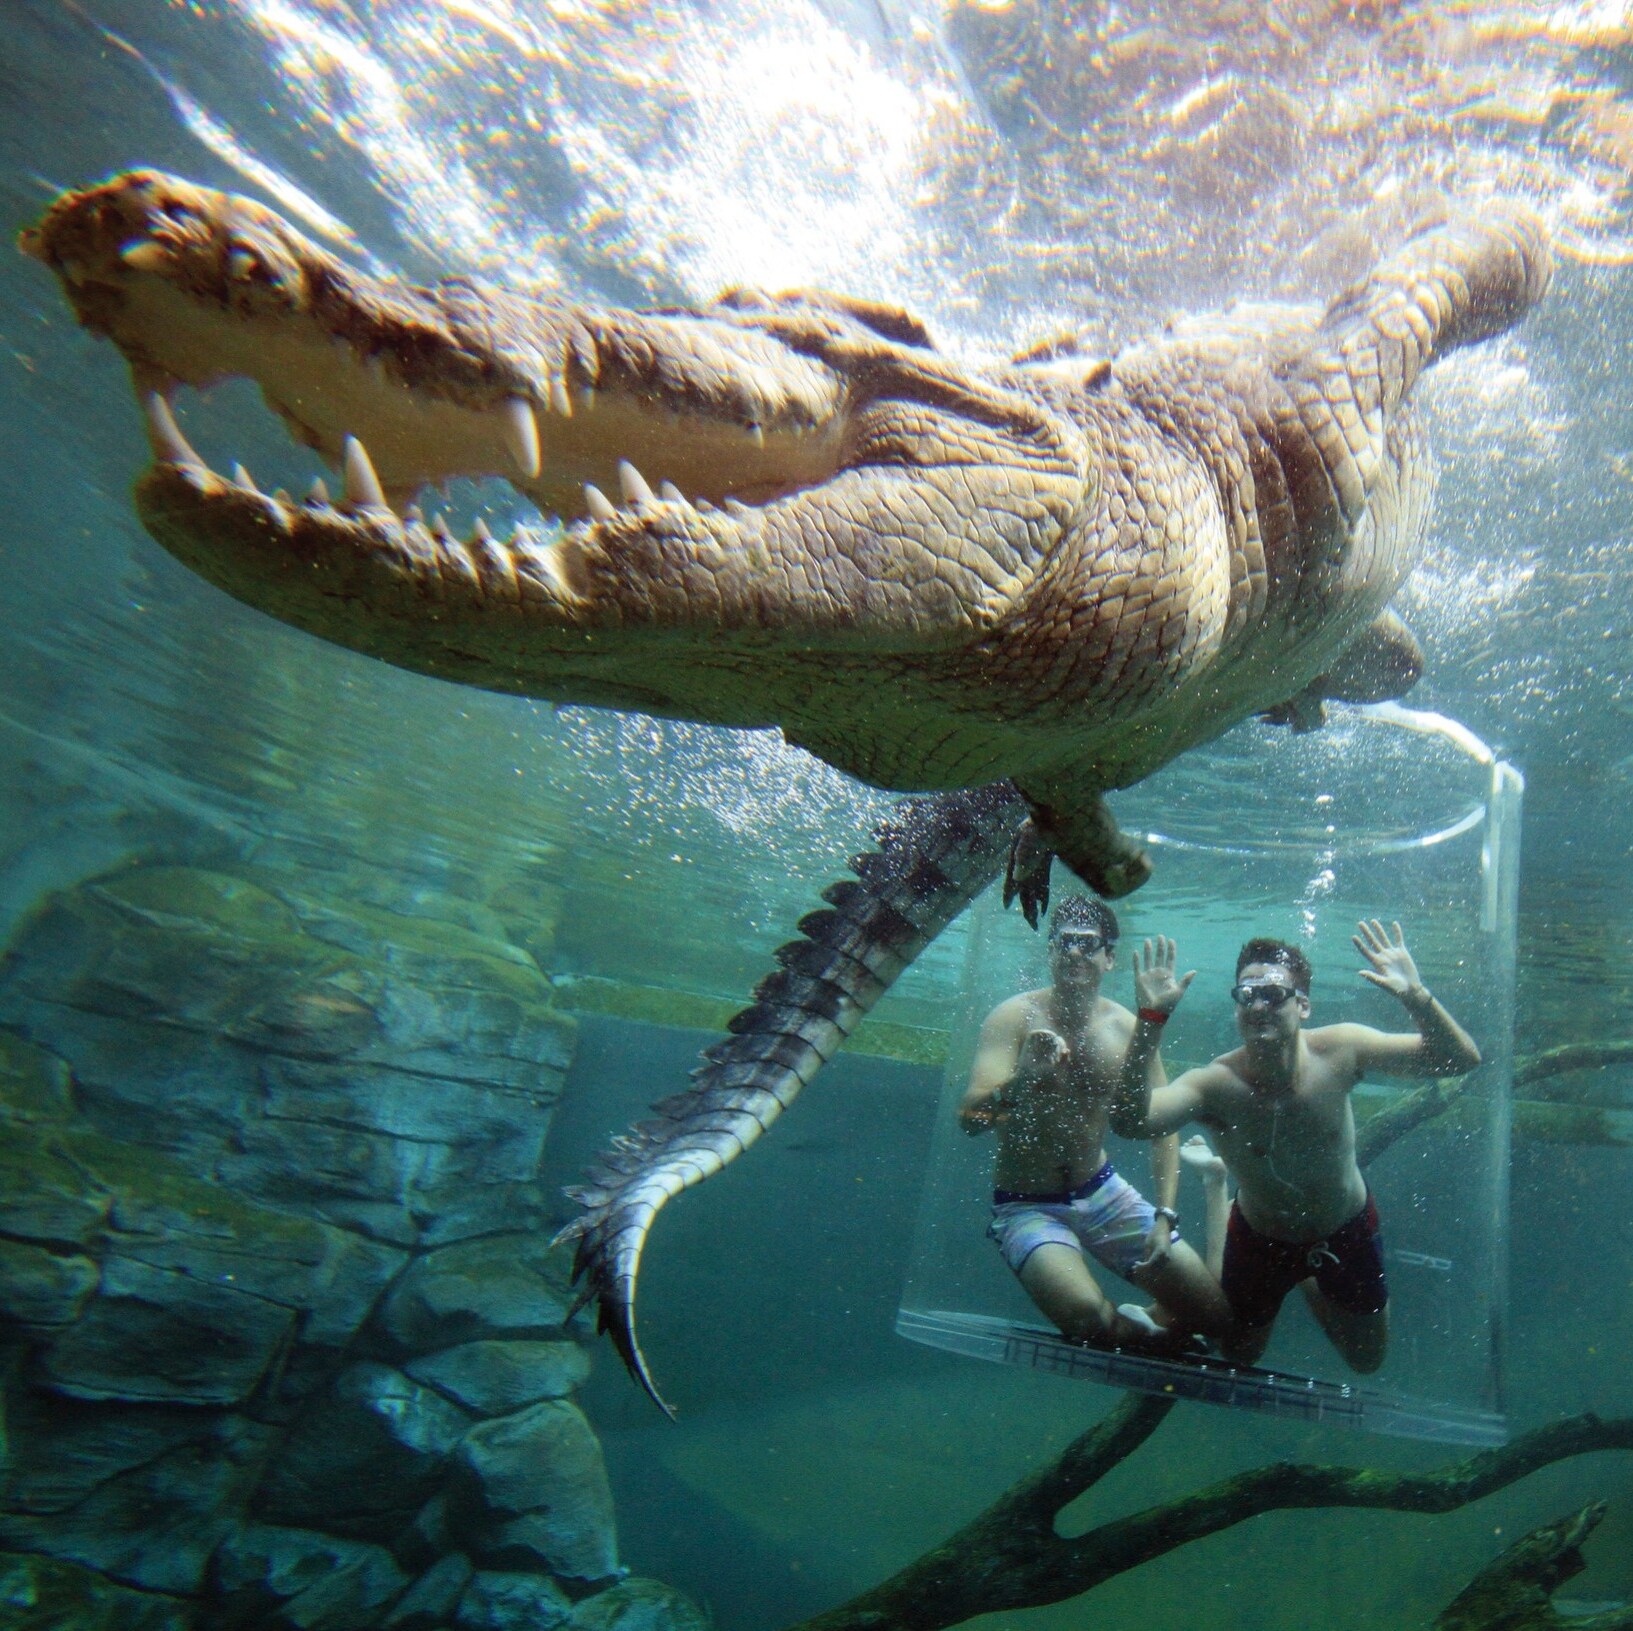 A visitor diving in the Cage of Death with a saltwater crocodile at Crocosaurus Cove © Tourism NT/Shaana McNaught